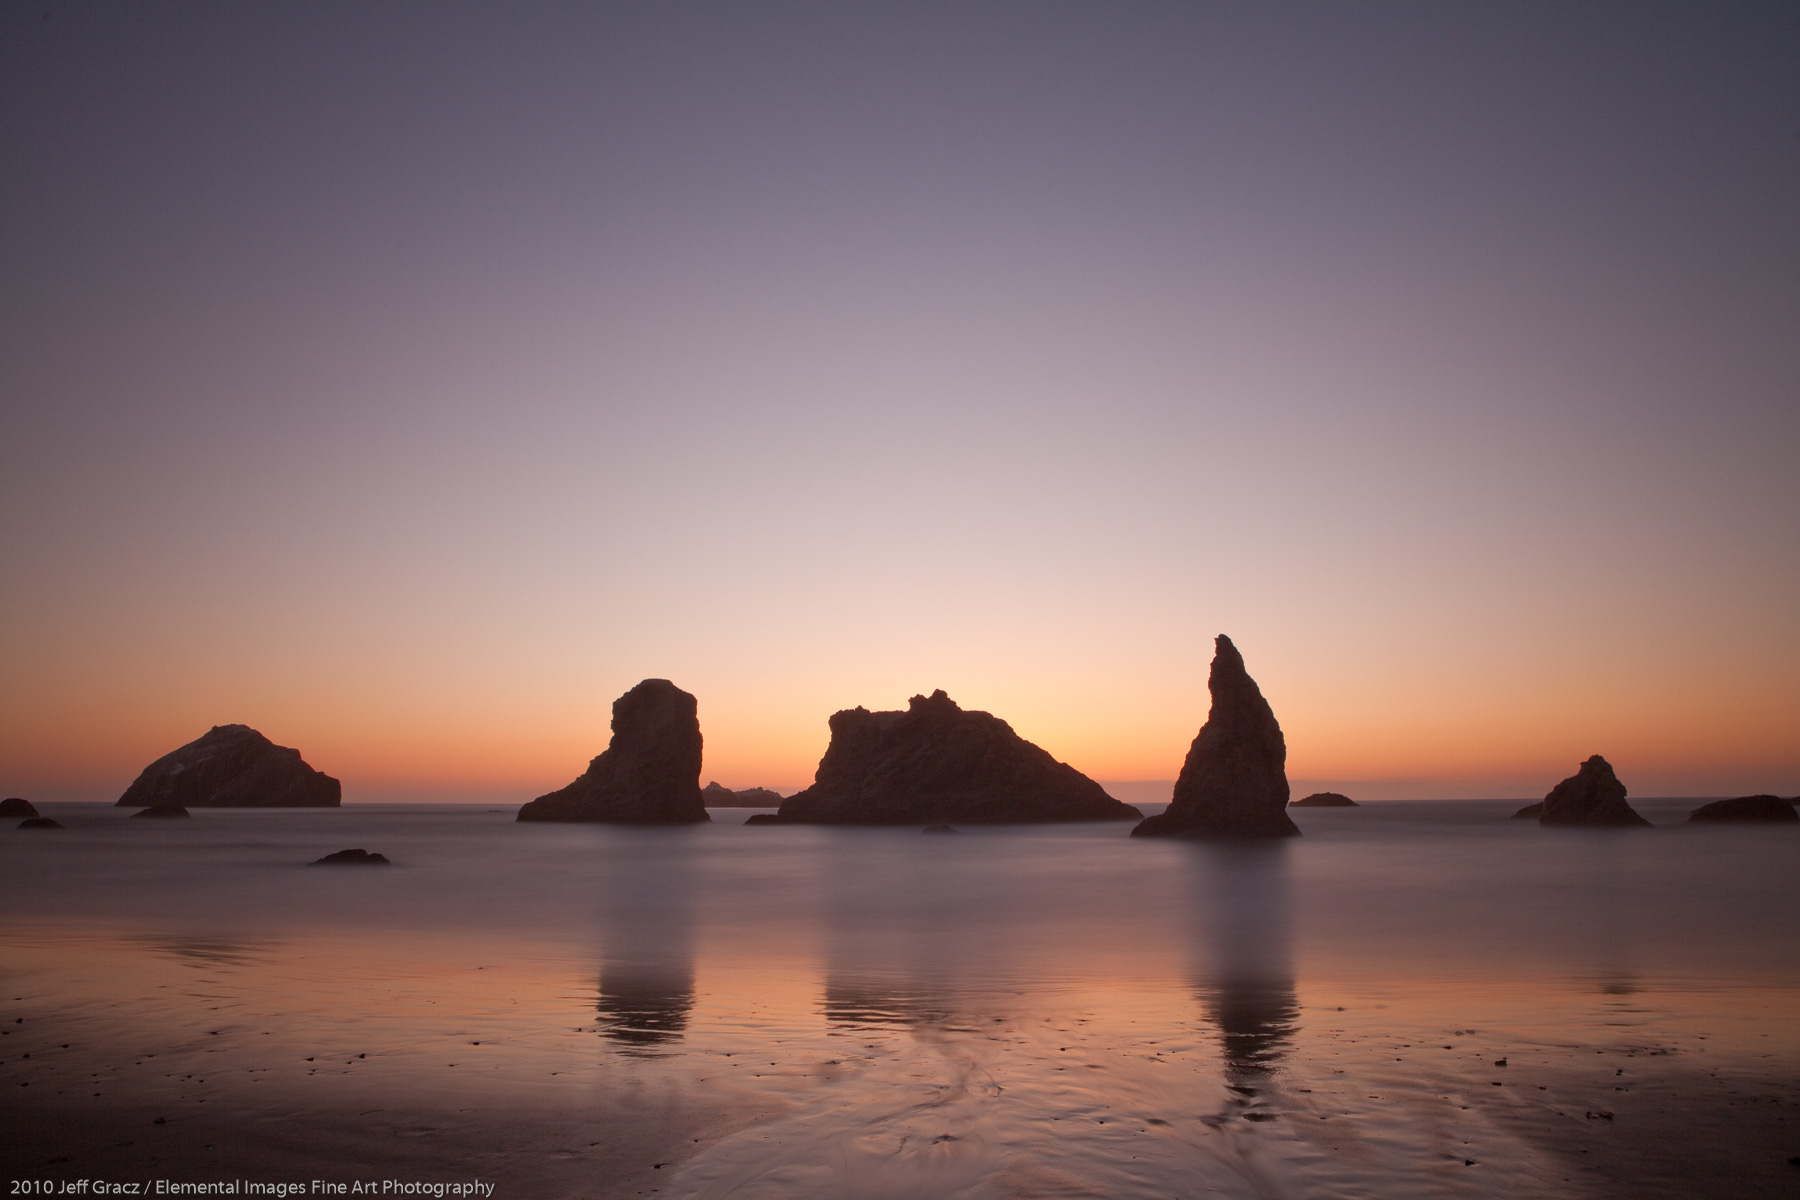 Last Light on Bandon Beach | Bandon | OR | USA - © 2010 Jeff Gracz / Elemental Images Fine Art Photography - All Rights Reserved Worldwide